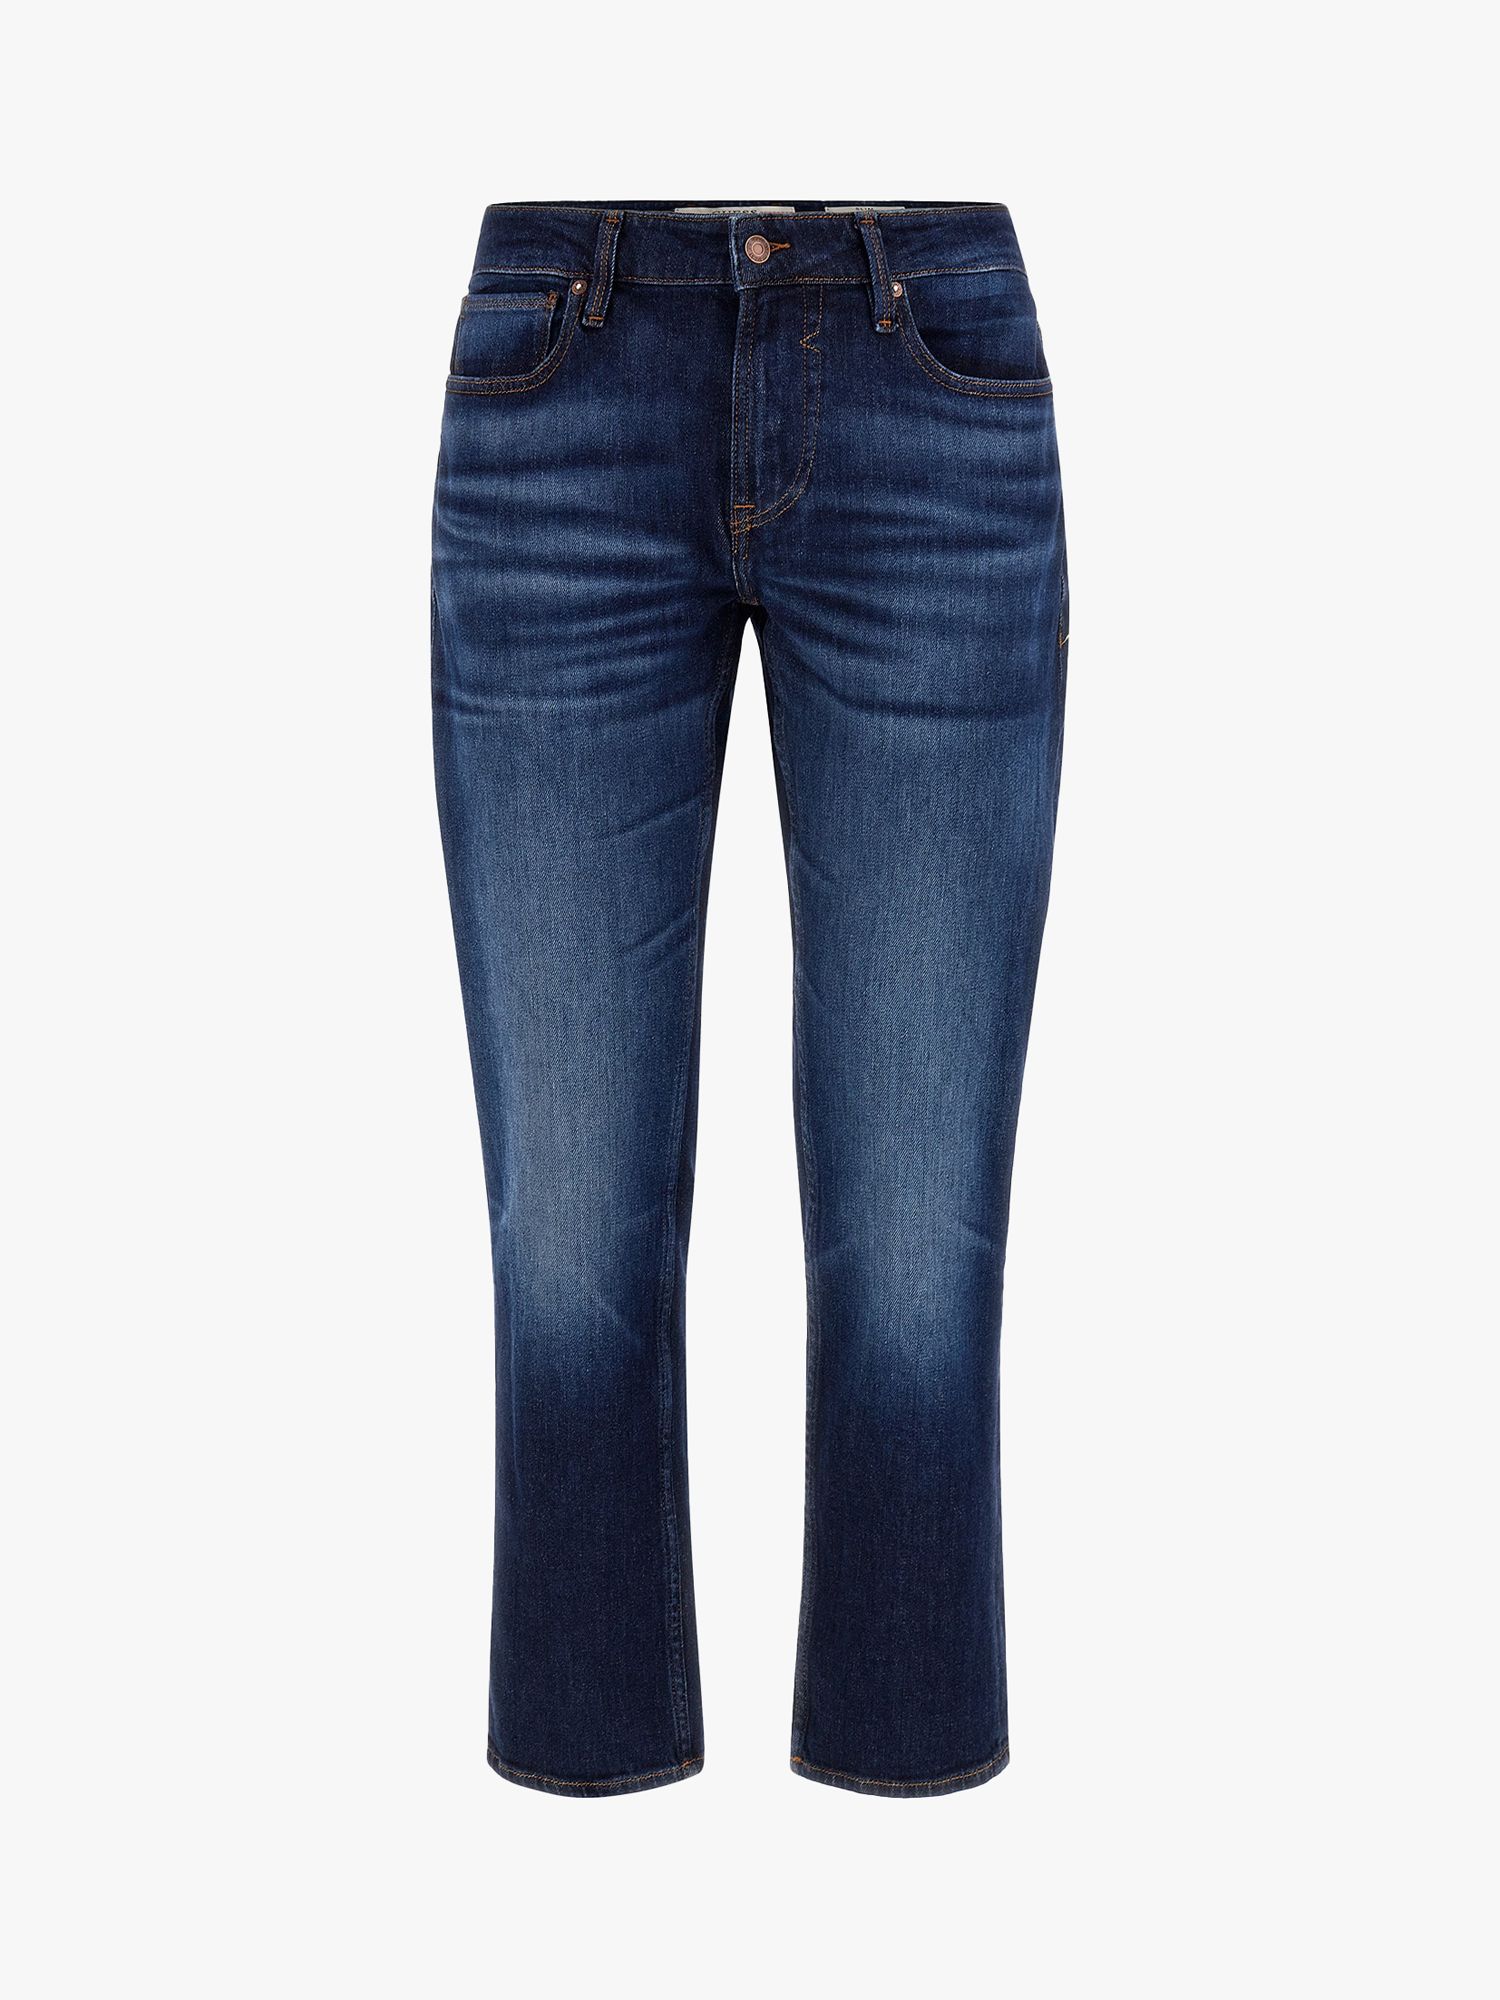 GUESS Angels Slim Fit Jeans, Carry Dark at John Lewis & Partners